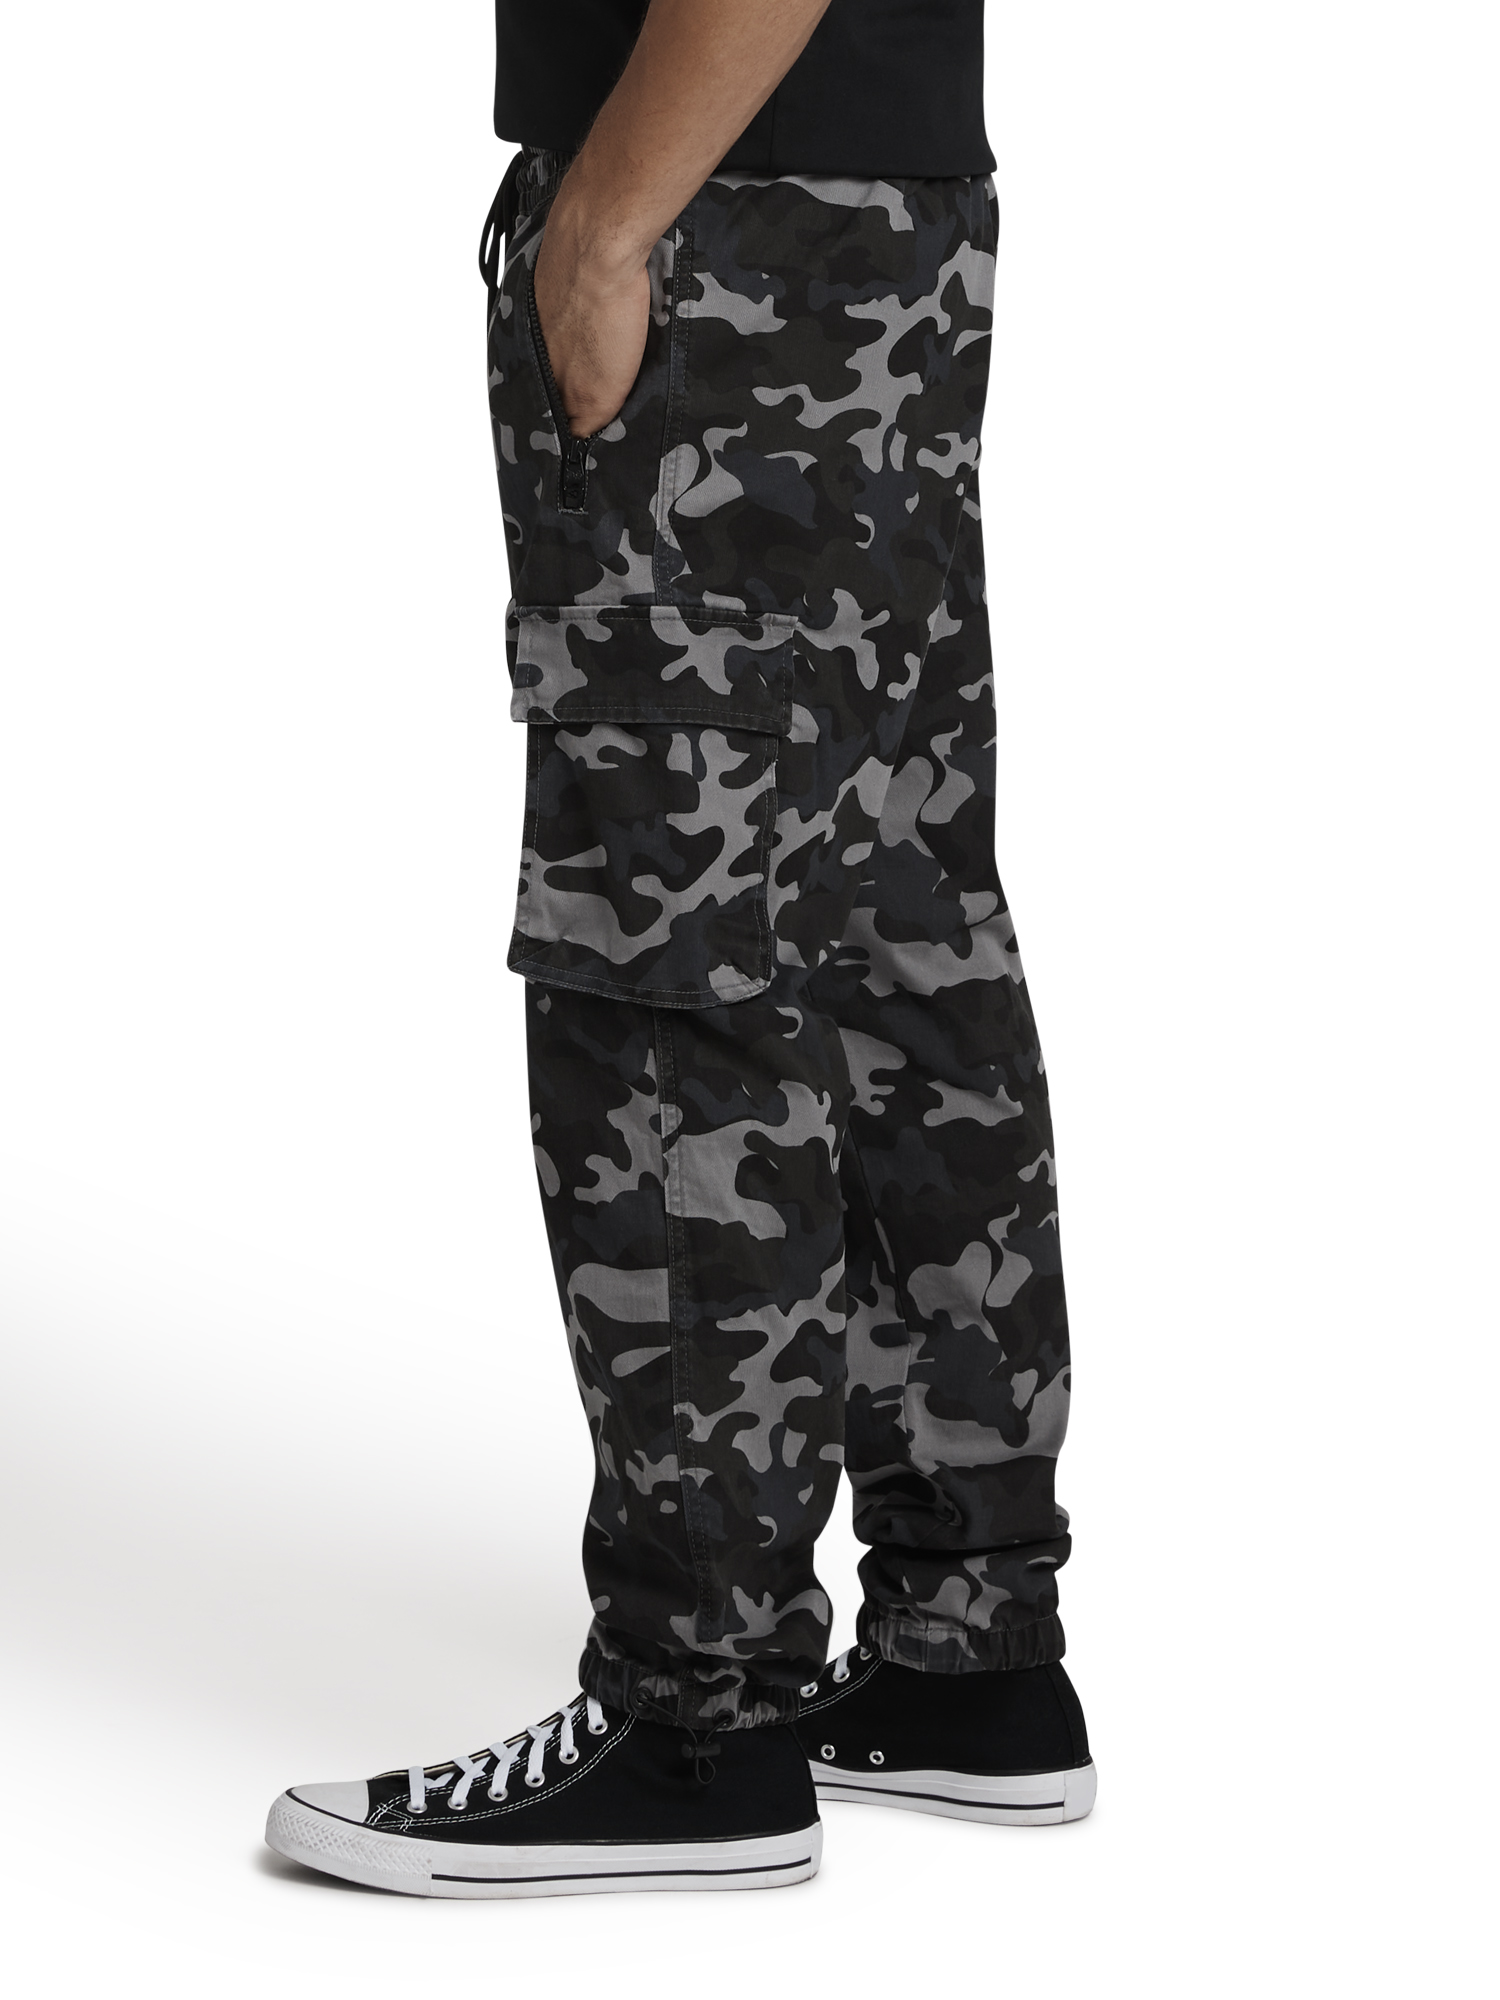 Dogg Supply by Snoop Dogg Men's and Big Men's Bungee Cargo Pants, Sizes ...